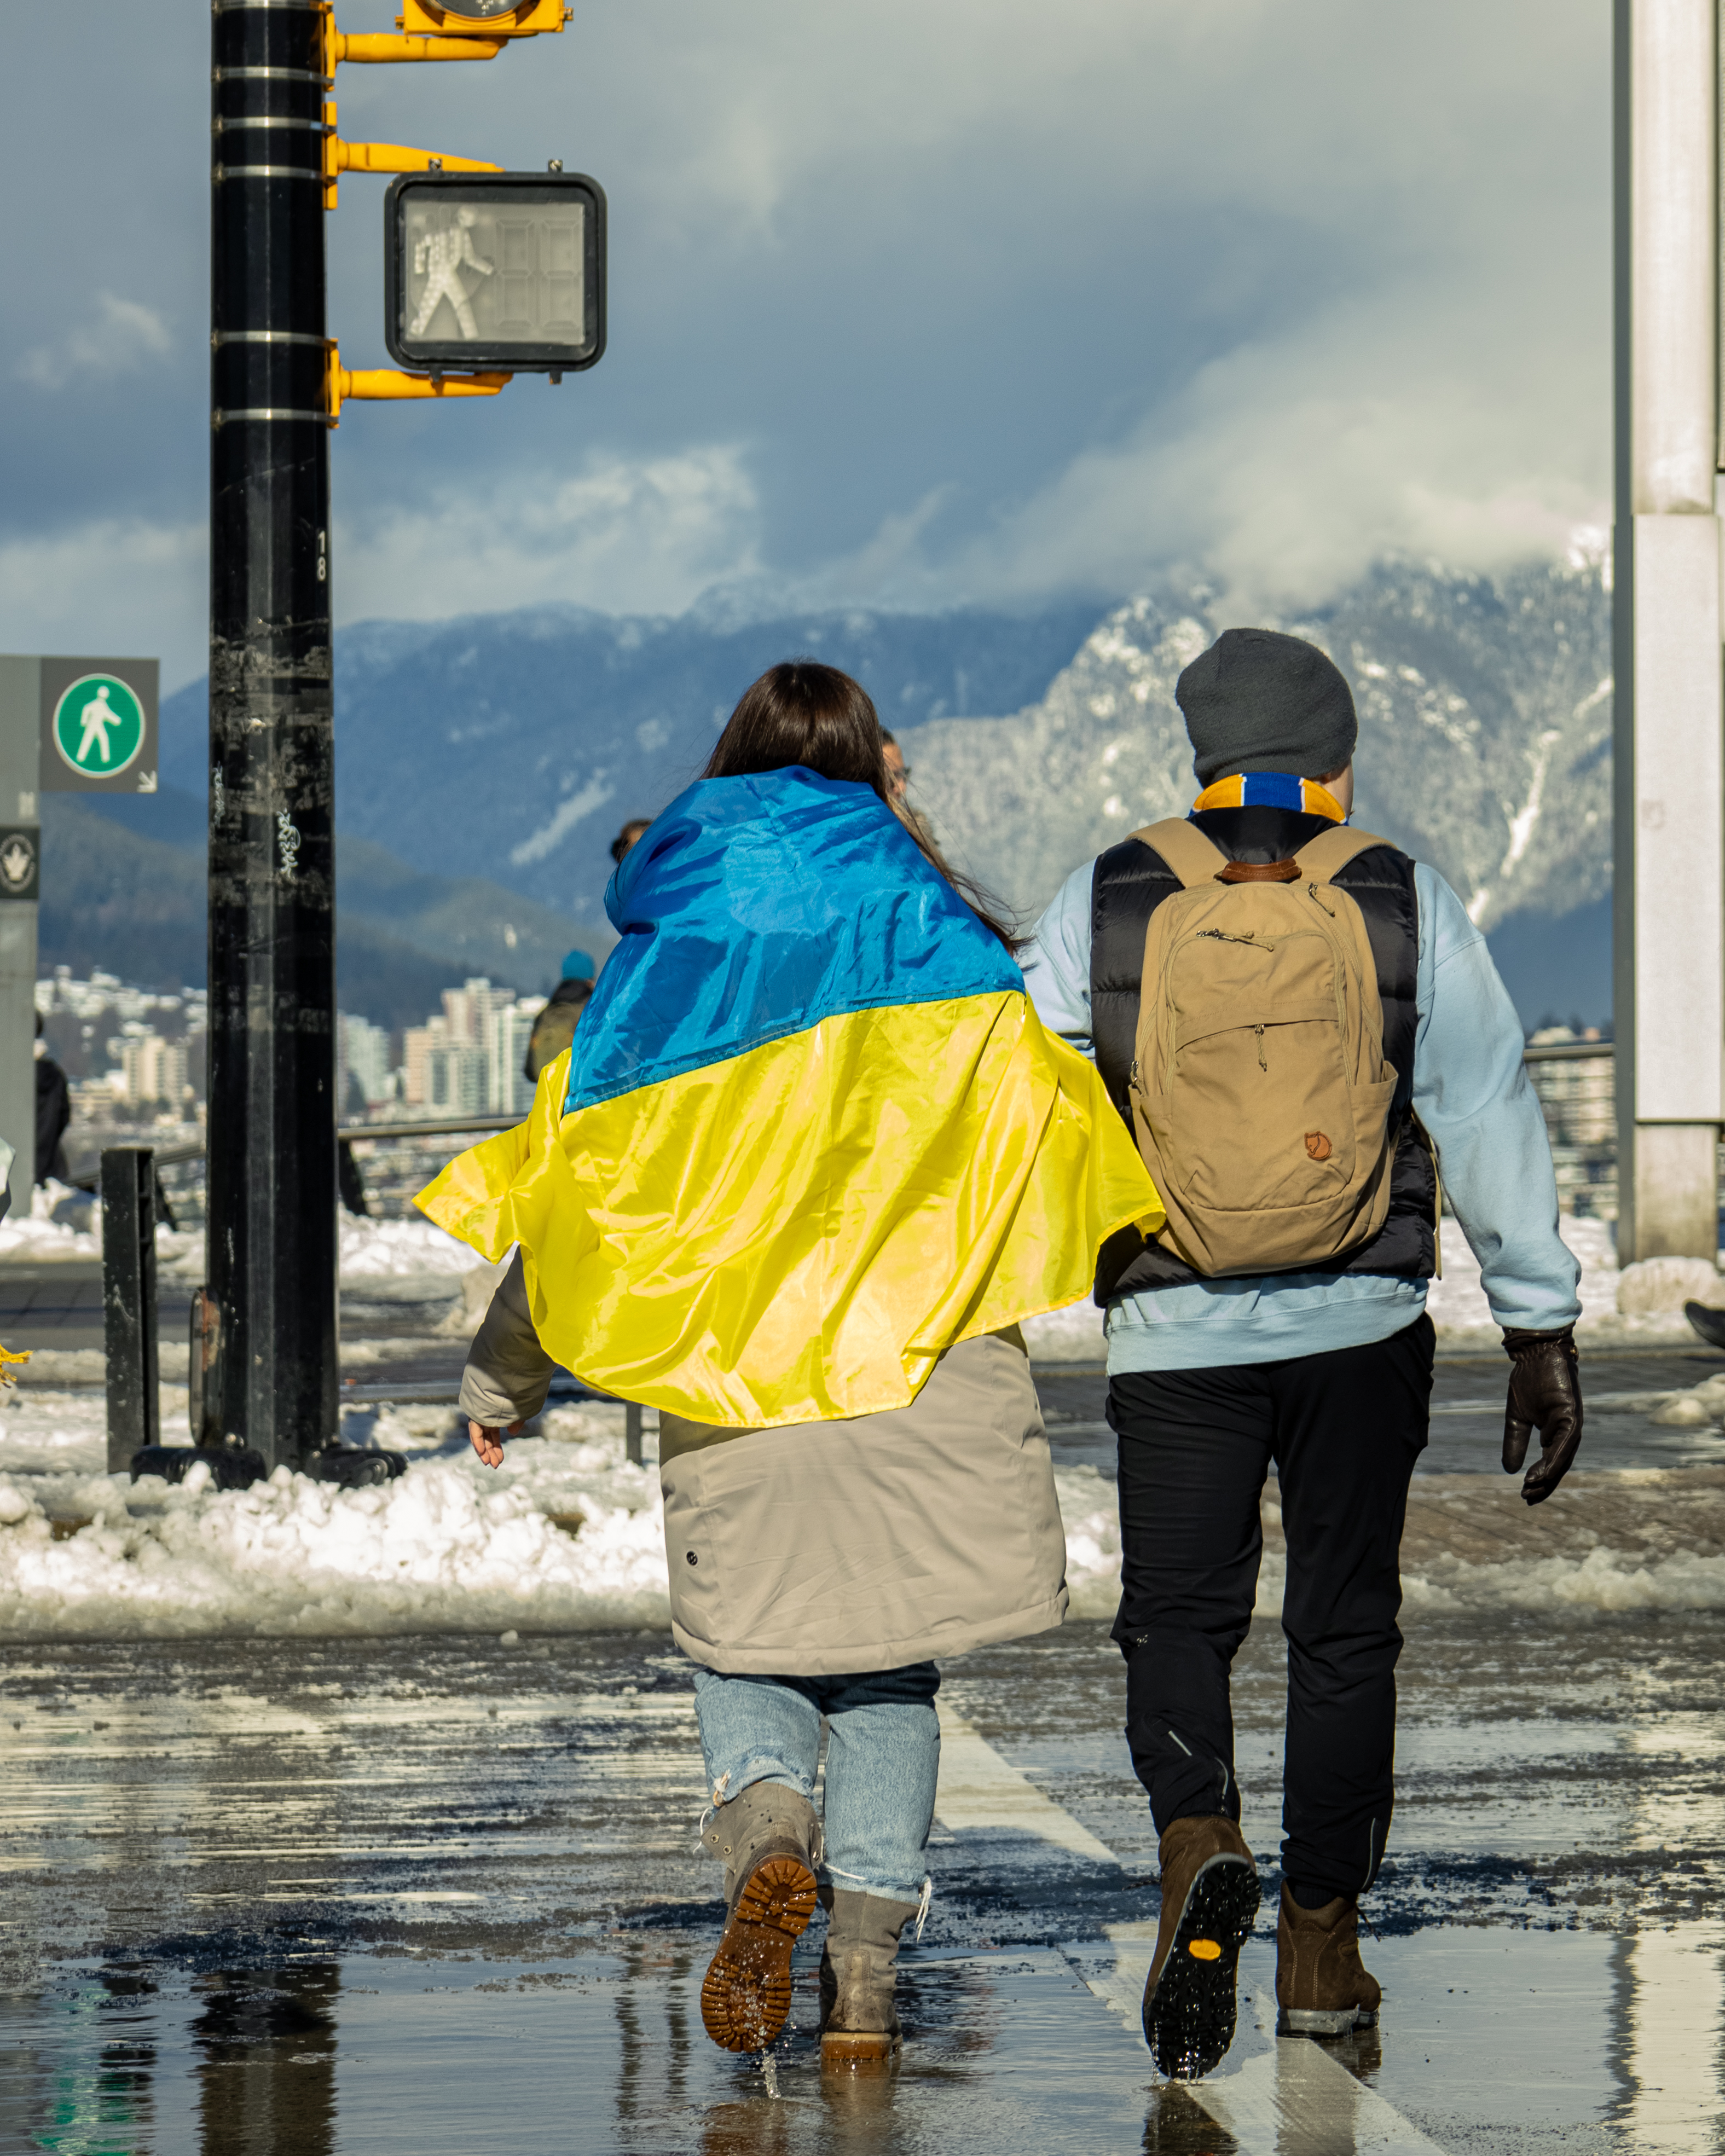 Rally in Vancouver on February 26th 2023 to support Ukraine